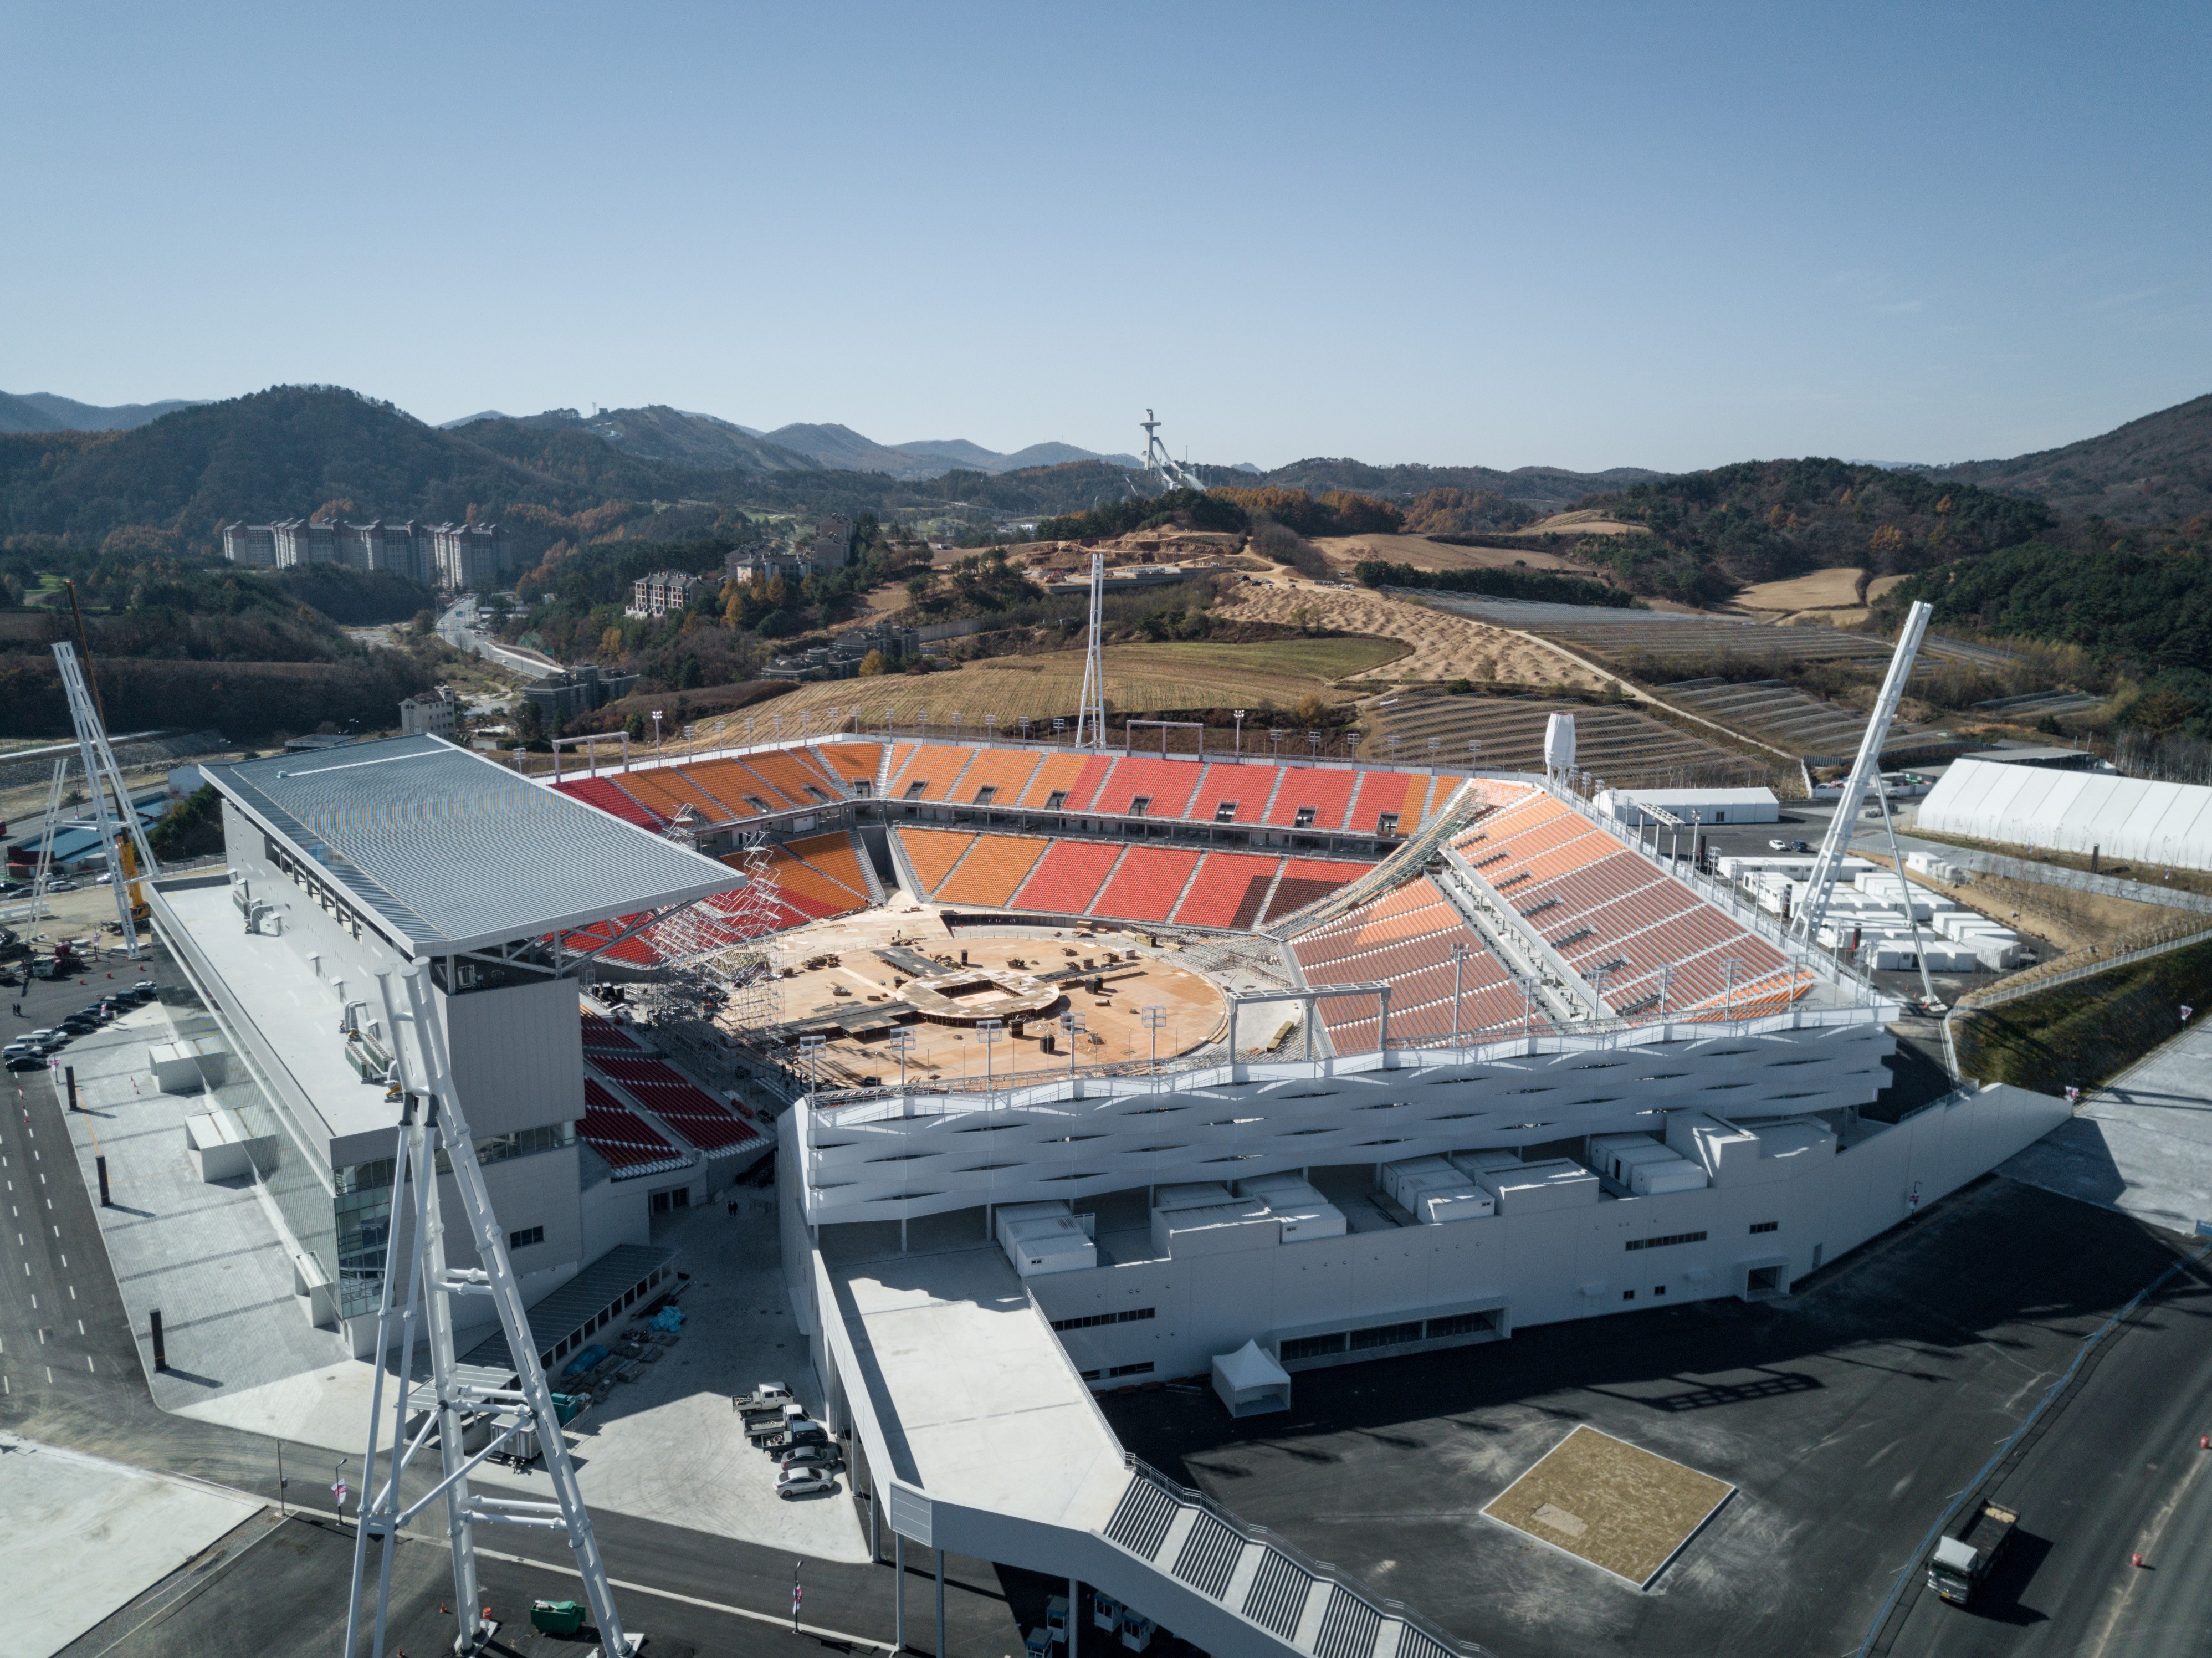 An aerial photo shows a general view of the Pyeongchang Olympic Stadium venue of the Pyeongchang 2018 Winter Olympic games, in the town of Hoenggye on October 31, 2017. (Ed Jones—AFP/Getty Images) (Ed Jones—AFP/Getty Images))